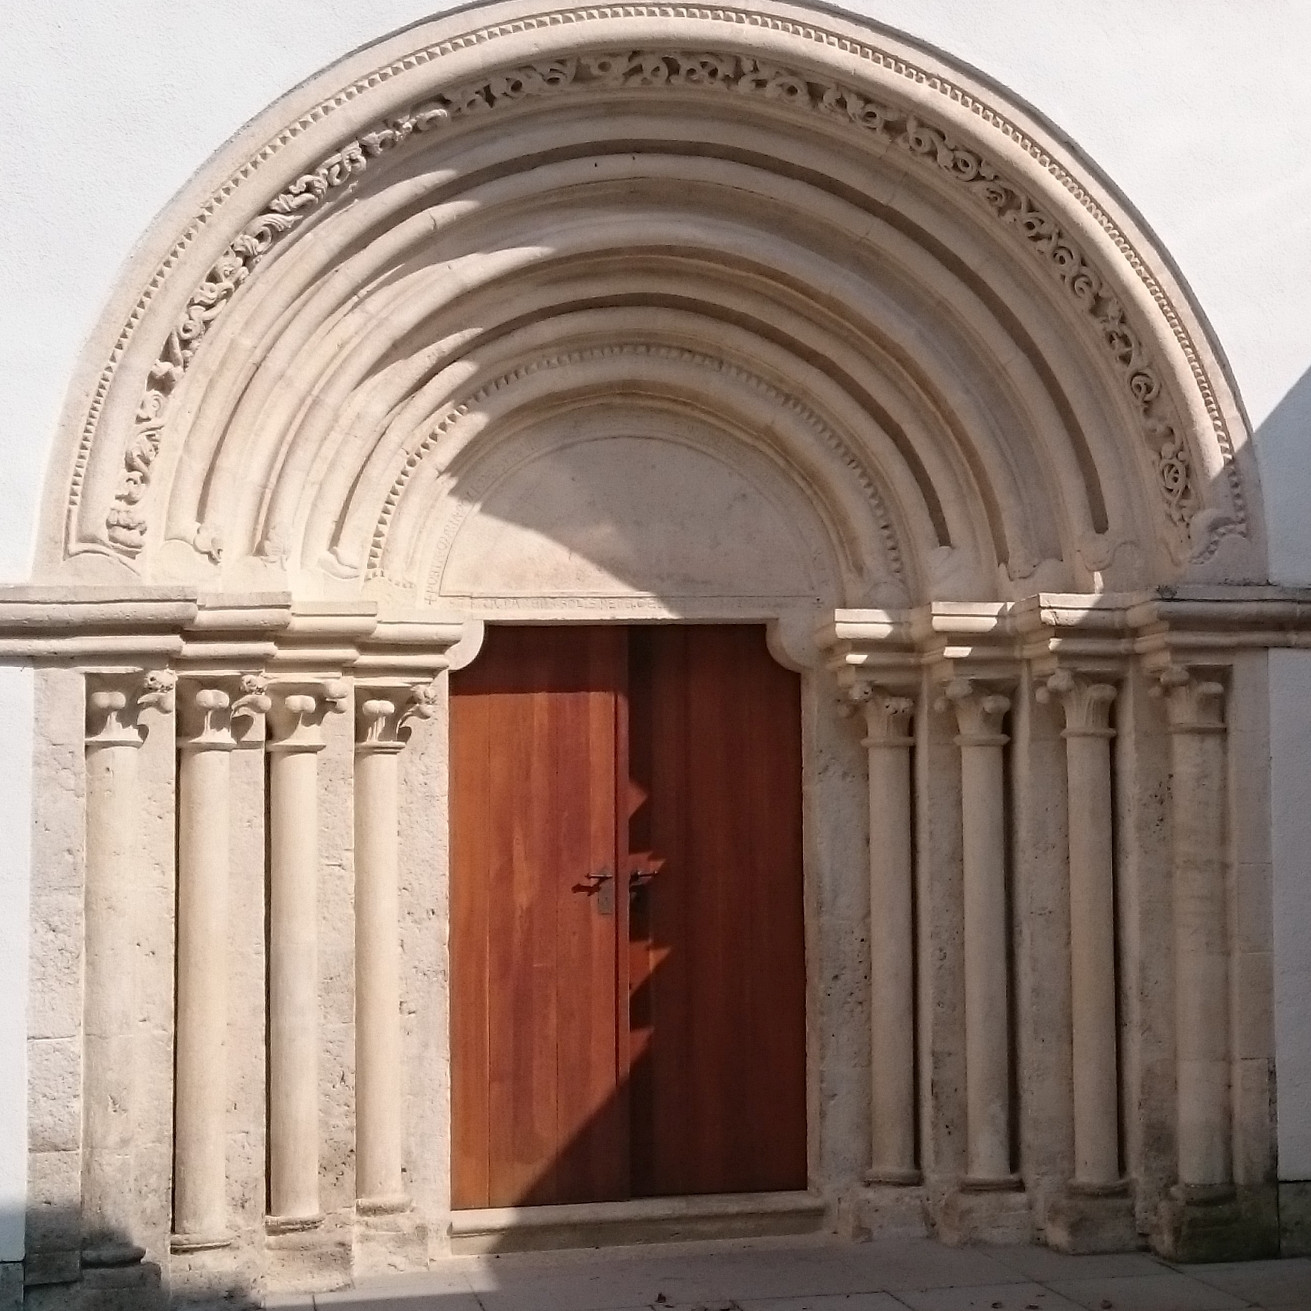 A photo of an arched door in the style of Romanesque architecture